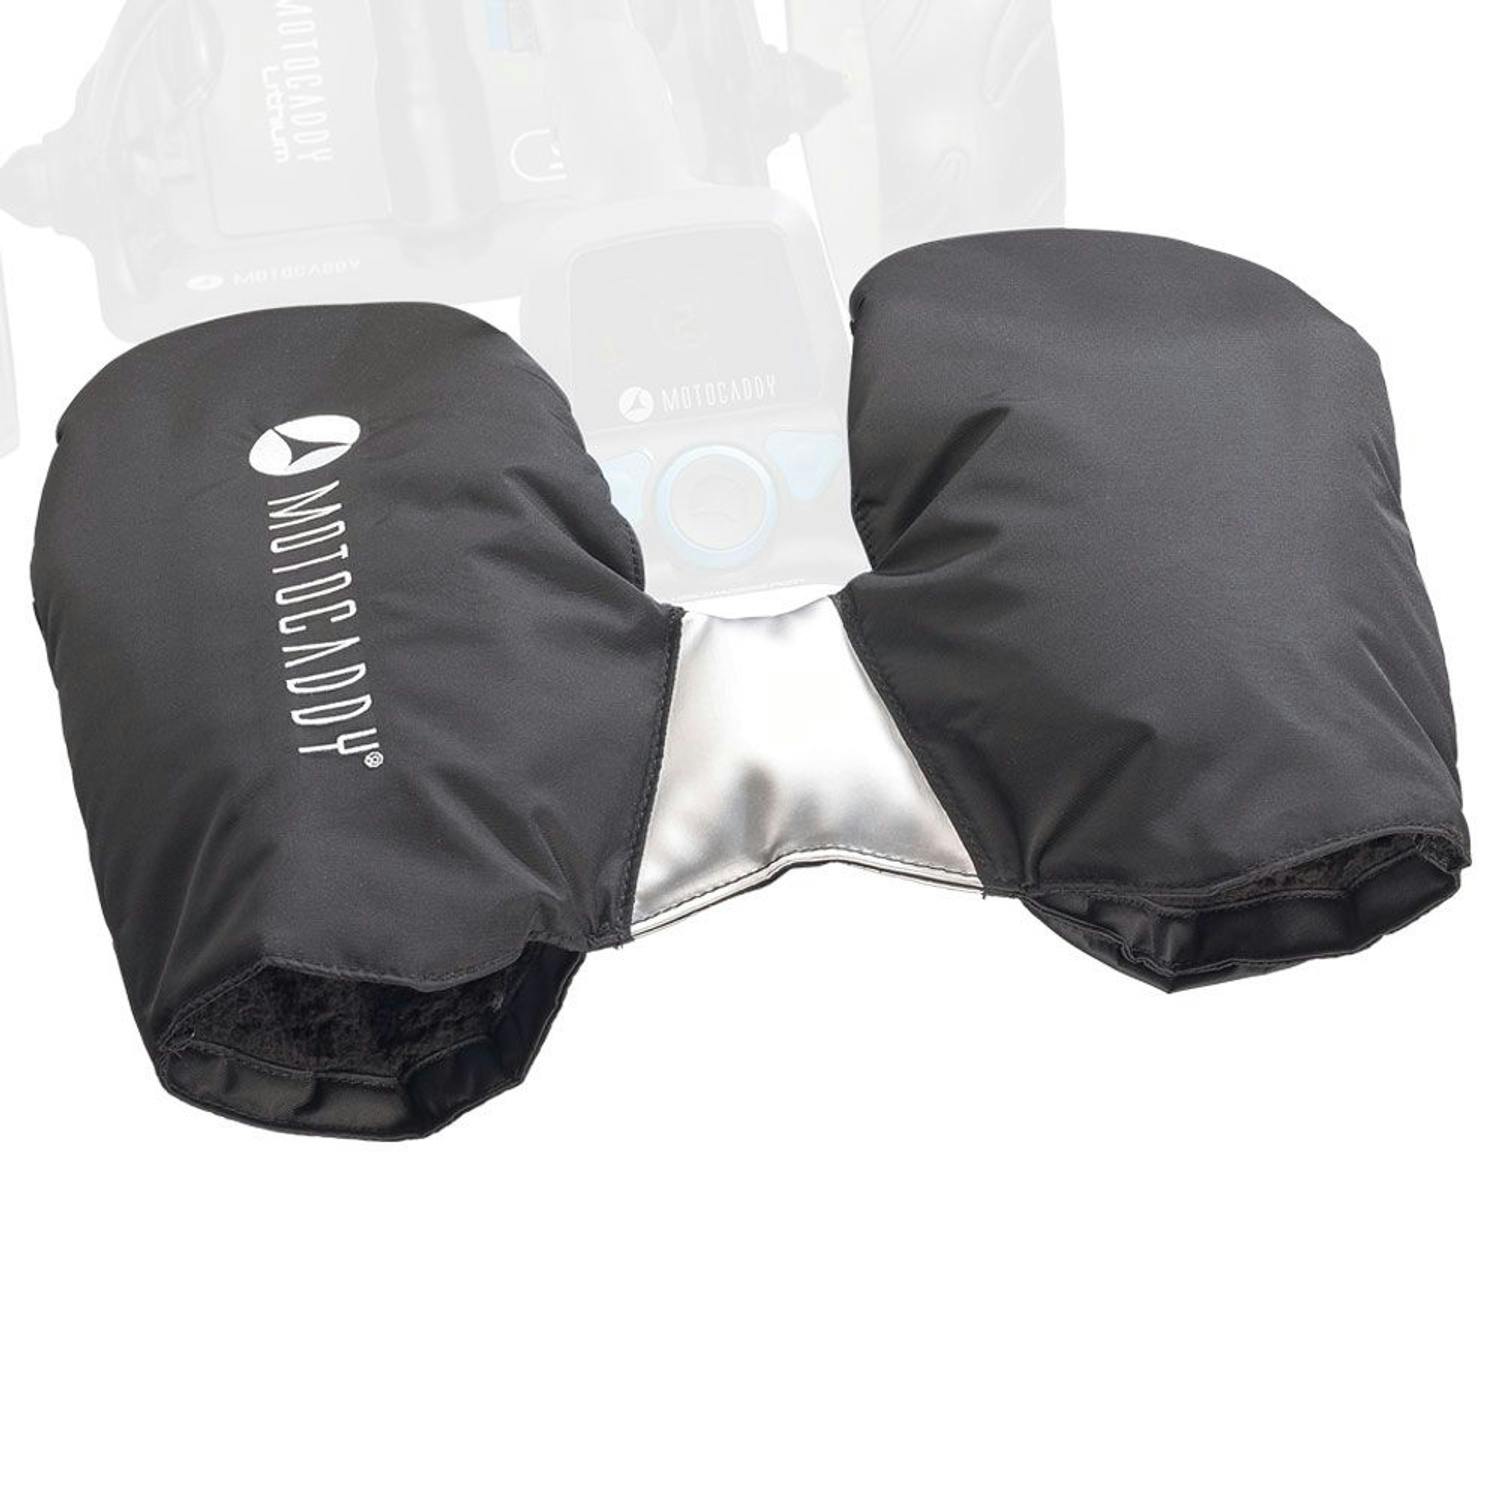 MC Deluxe Trolley Mittens / Mitts (Pair)